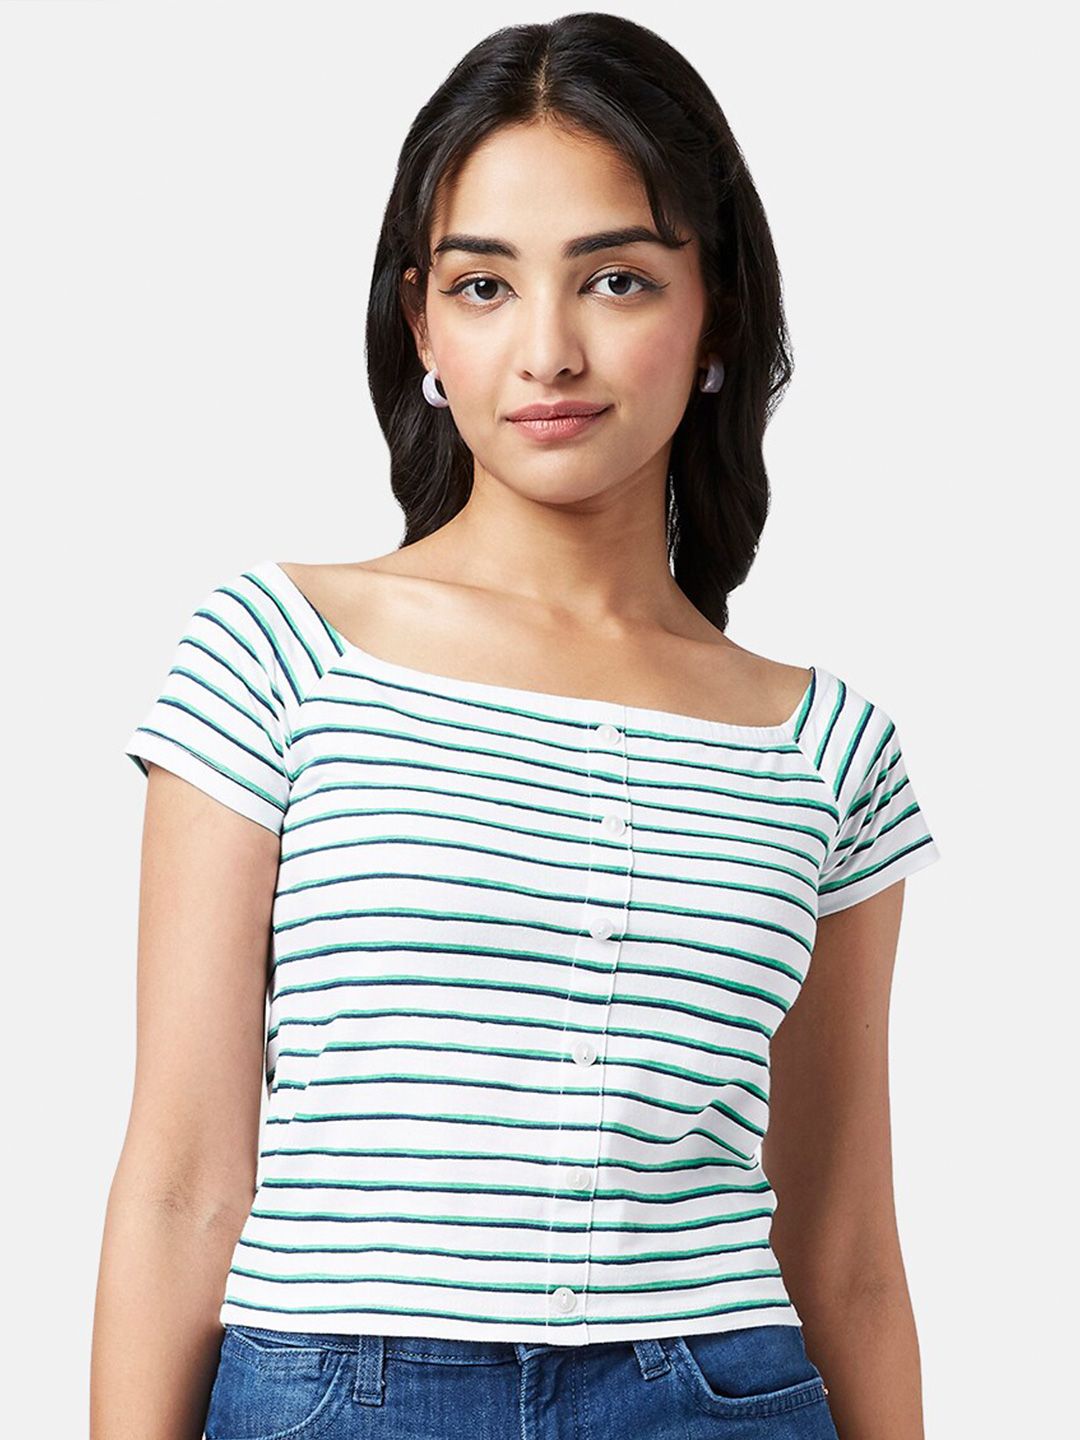 YU by Pantaloons Square Neck Striped Top Price in India